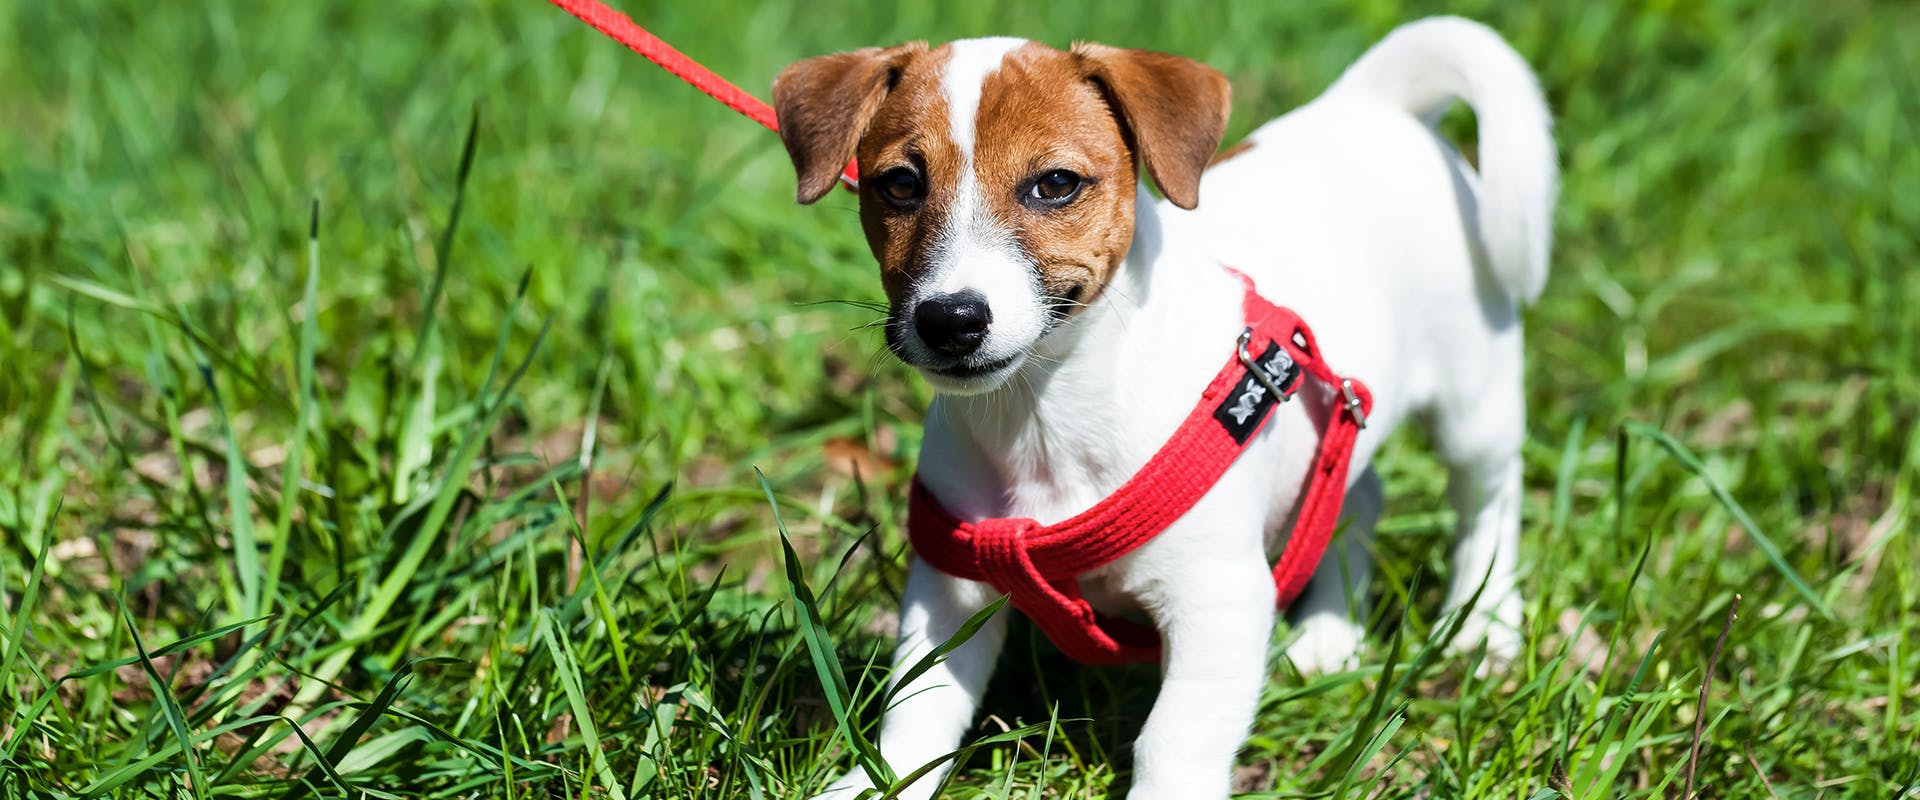 what is the best small dog harness